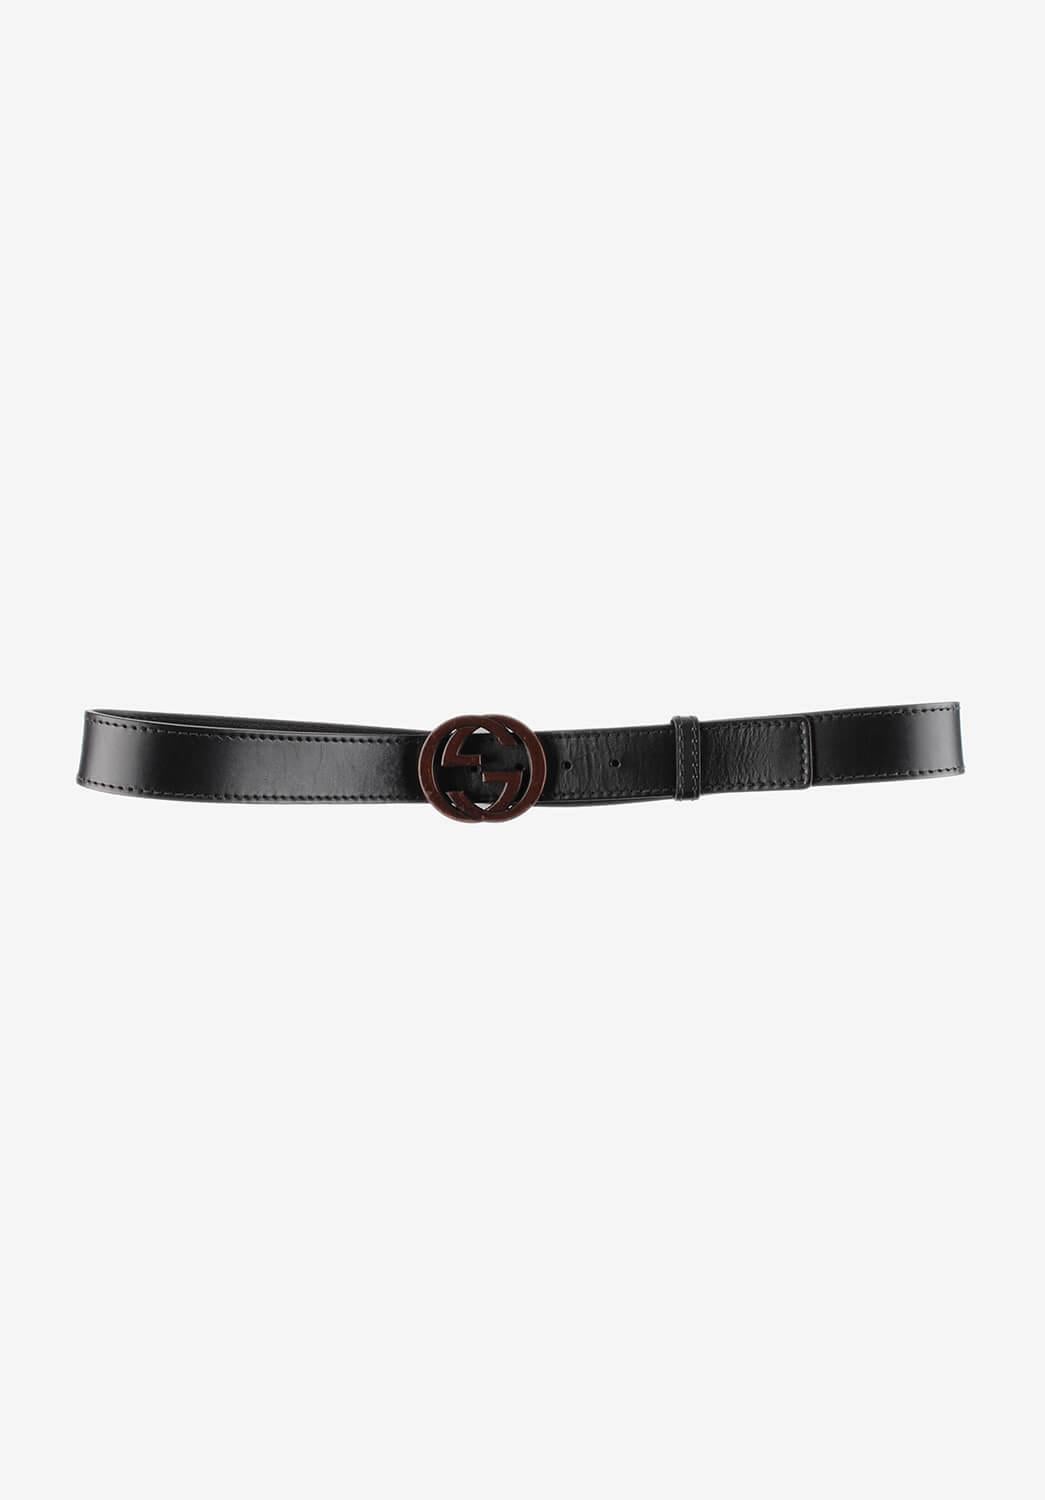 Item for sale is 100% genuine Gucci Leather Men Belt with wooden buckle
Color: Black
(An actual color may a bit vary due to individual computer screen interpretation)
Material: Leather
Tag size: 100/40
This belt is great quality item. Rate 8.5 of